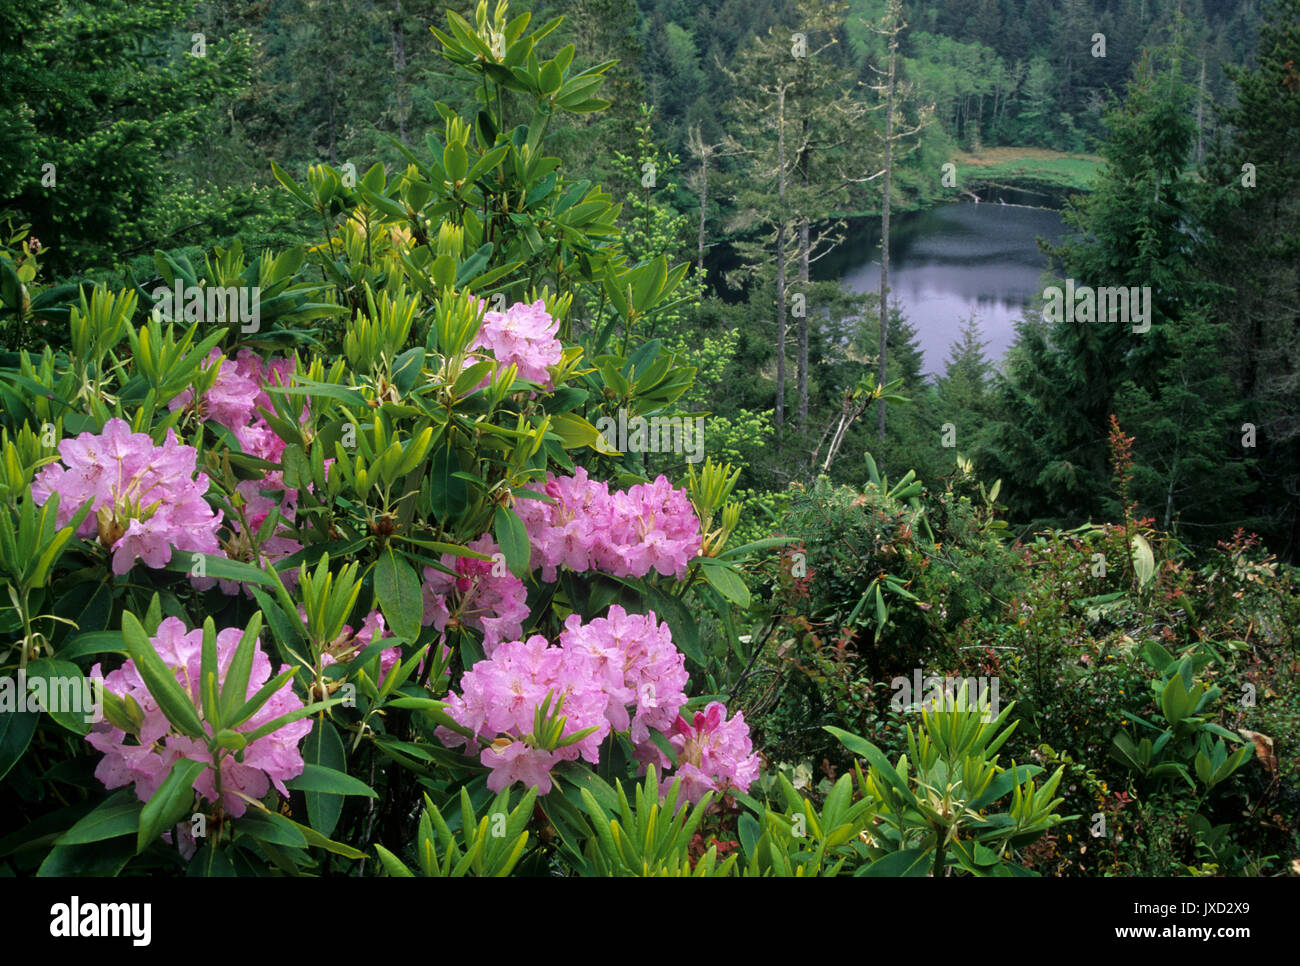 Elbow Lake with Pacific rhododendron (Rhododendron macrophyllum), Oregon Dunes National Recreation Area, Oregon Stock Photo